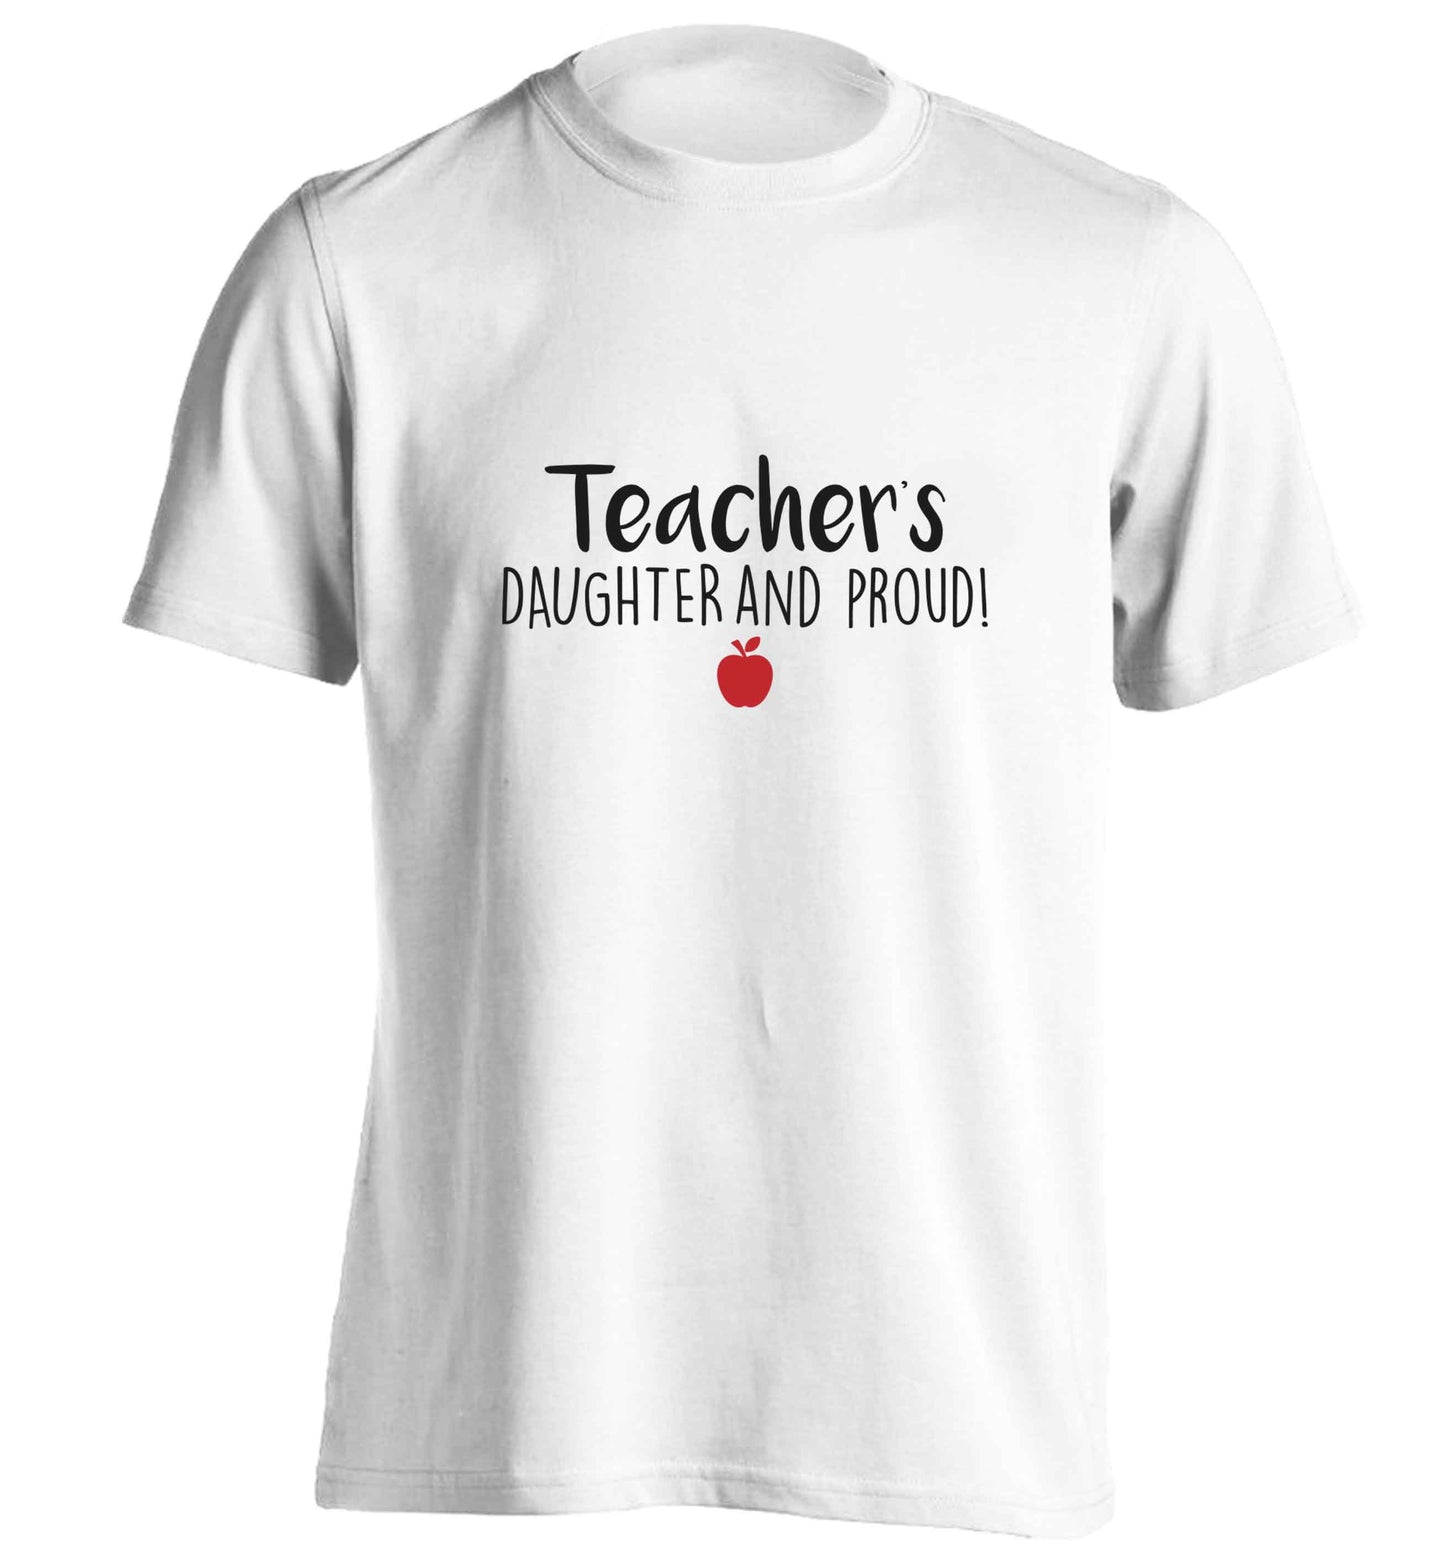 Teachers daughter and proud adults unisex white Tshirt 2XL